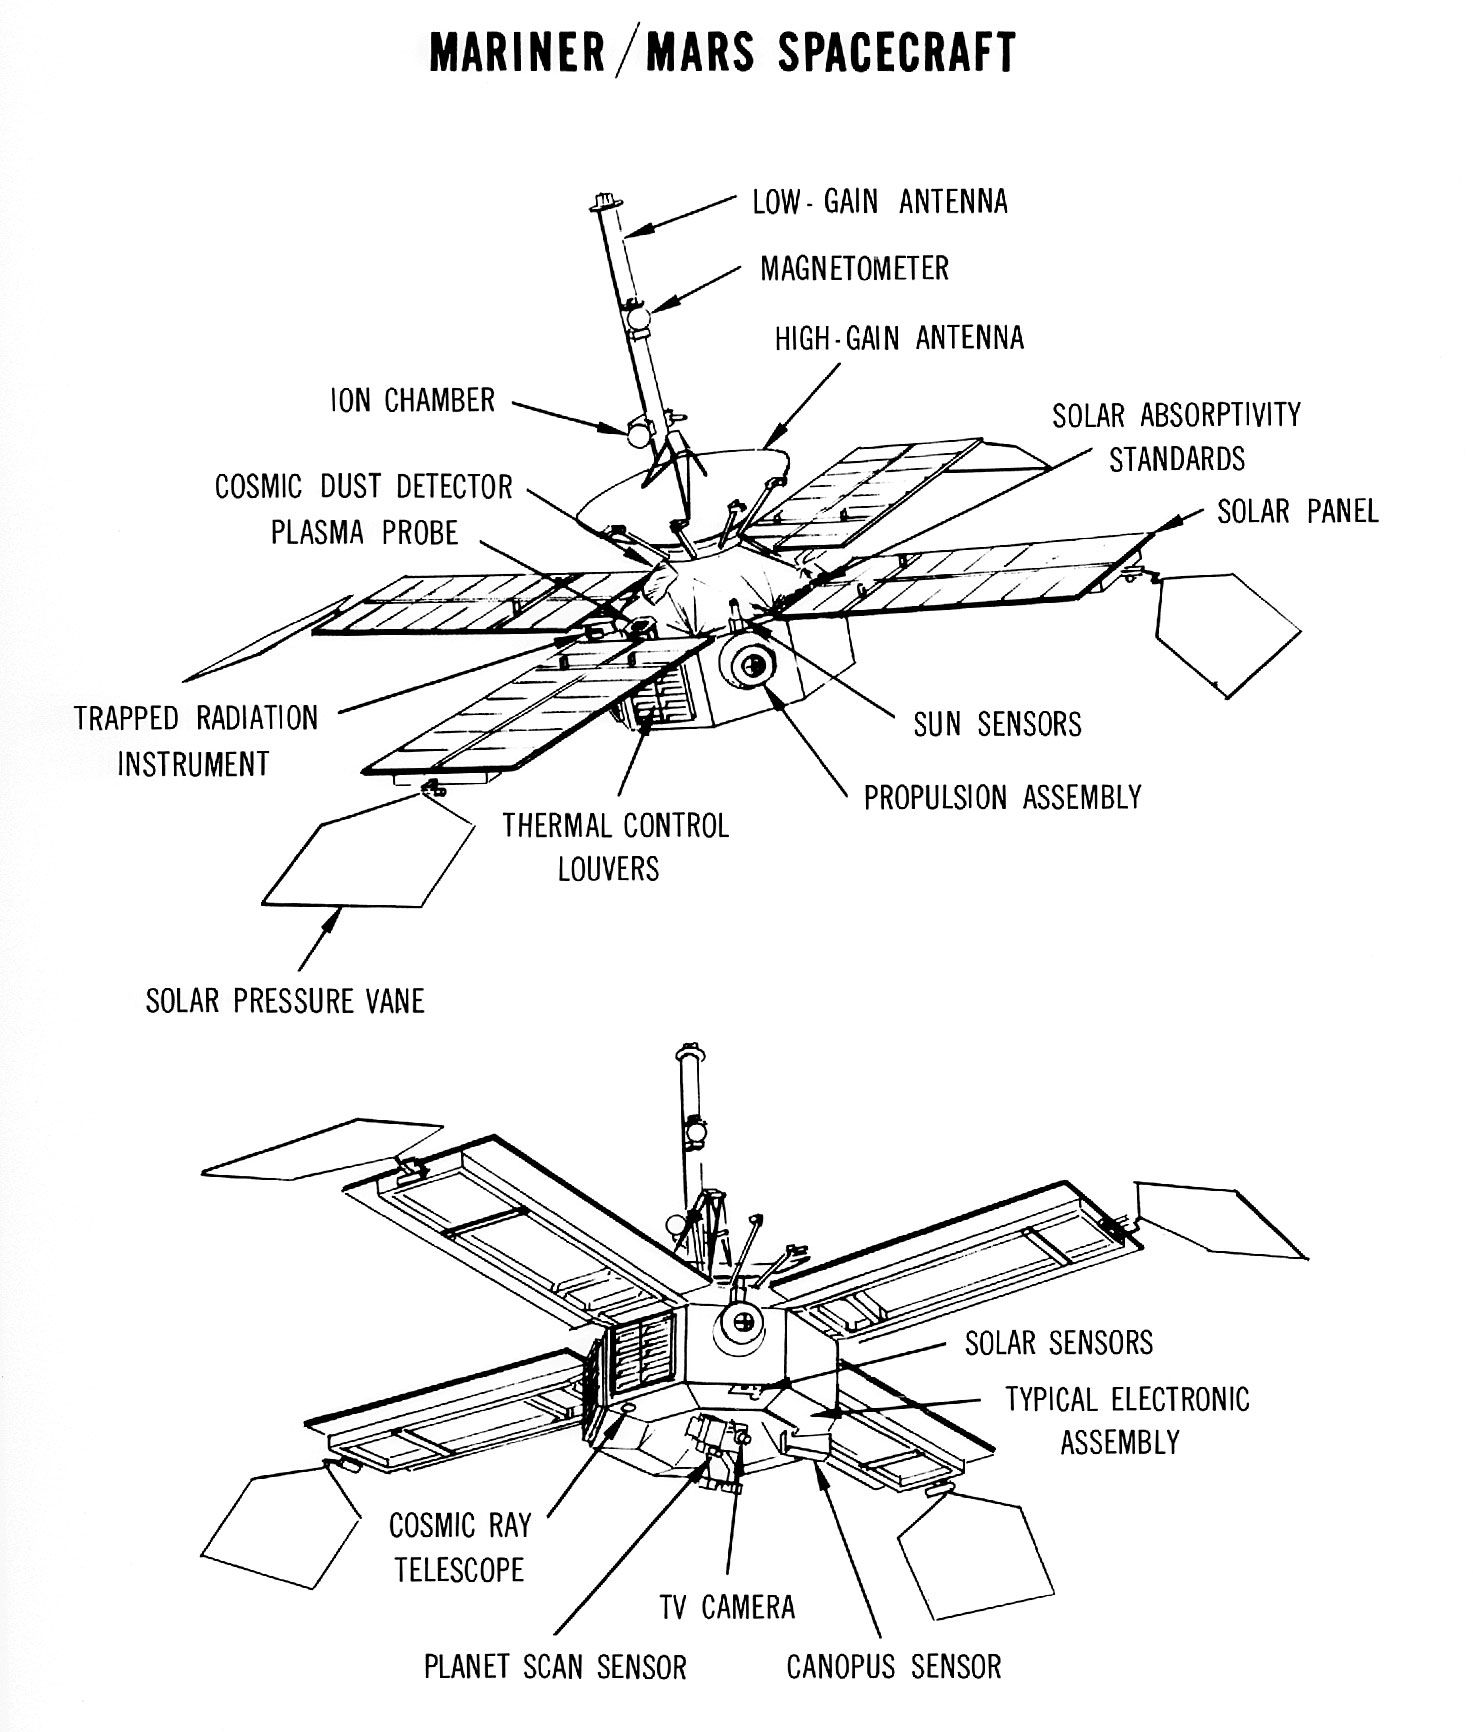 This diagram shows the Mariner Mars series spacecraft with instruments labeled.